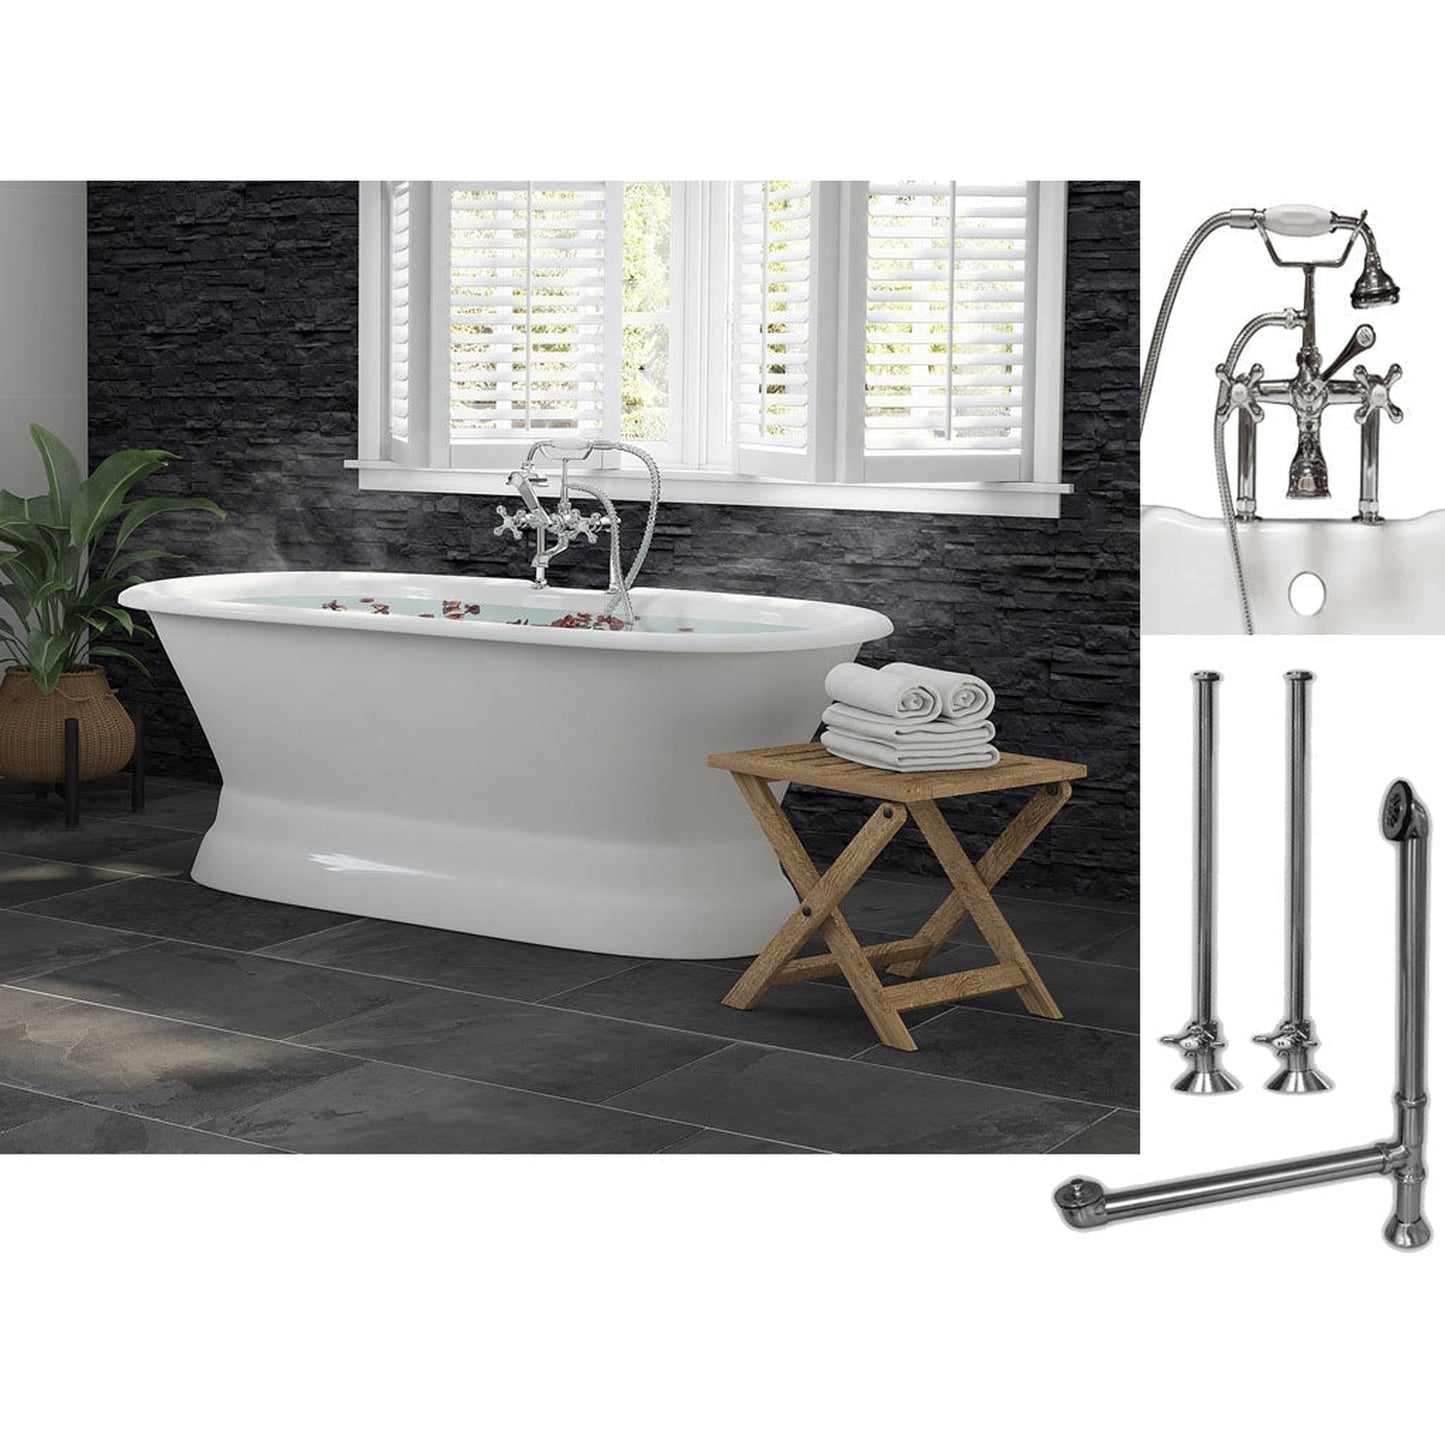 Cambridge Plumbing 66" White Cast Iron Double Ended Pedestal Bathtub With Deck Holes And Complete Plumbing Package Including 6” Riser Deck Mount Faucet, Supply Lines, Drain And Overflow Assembly In Polished Chrome